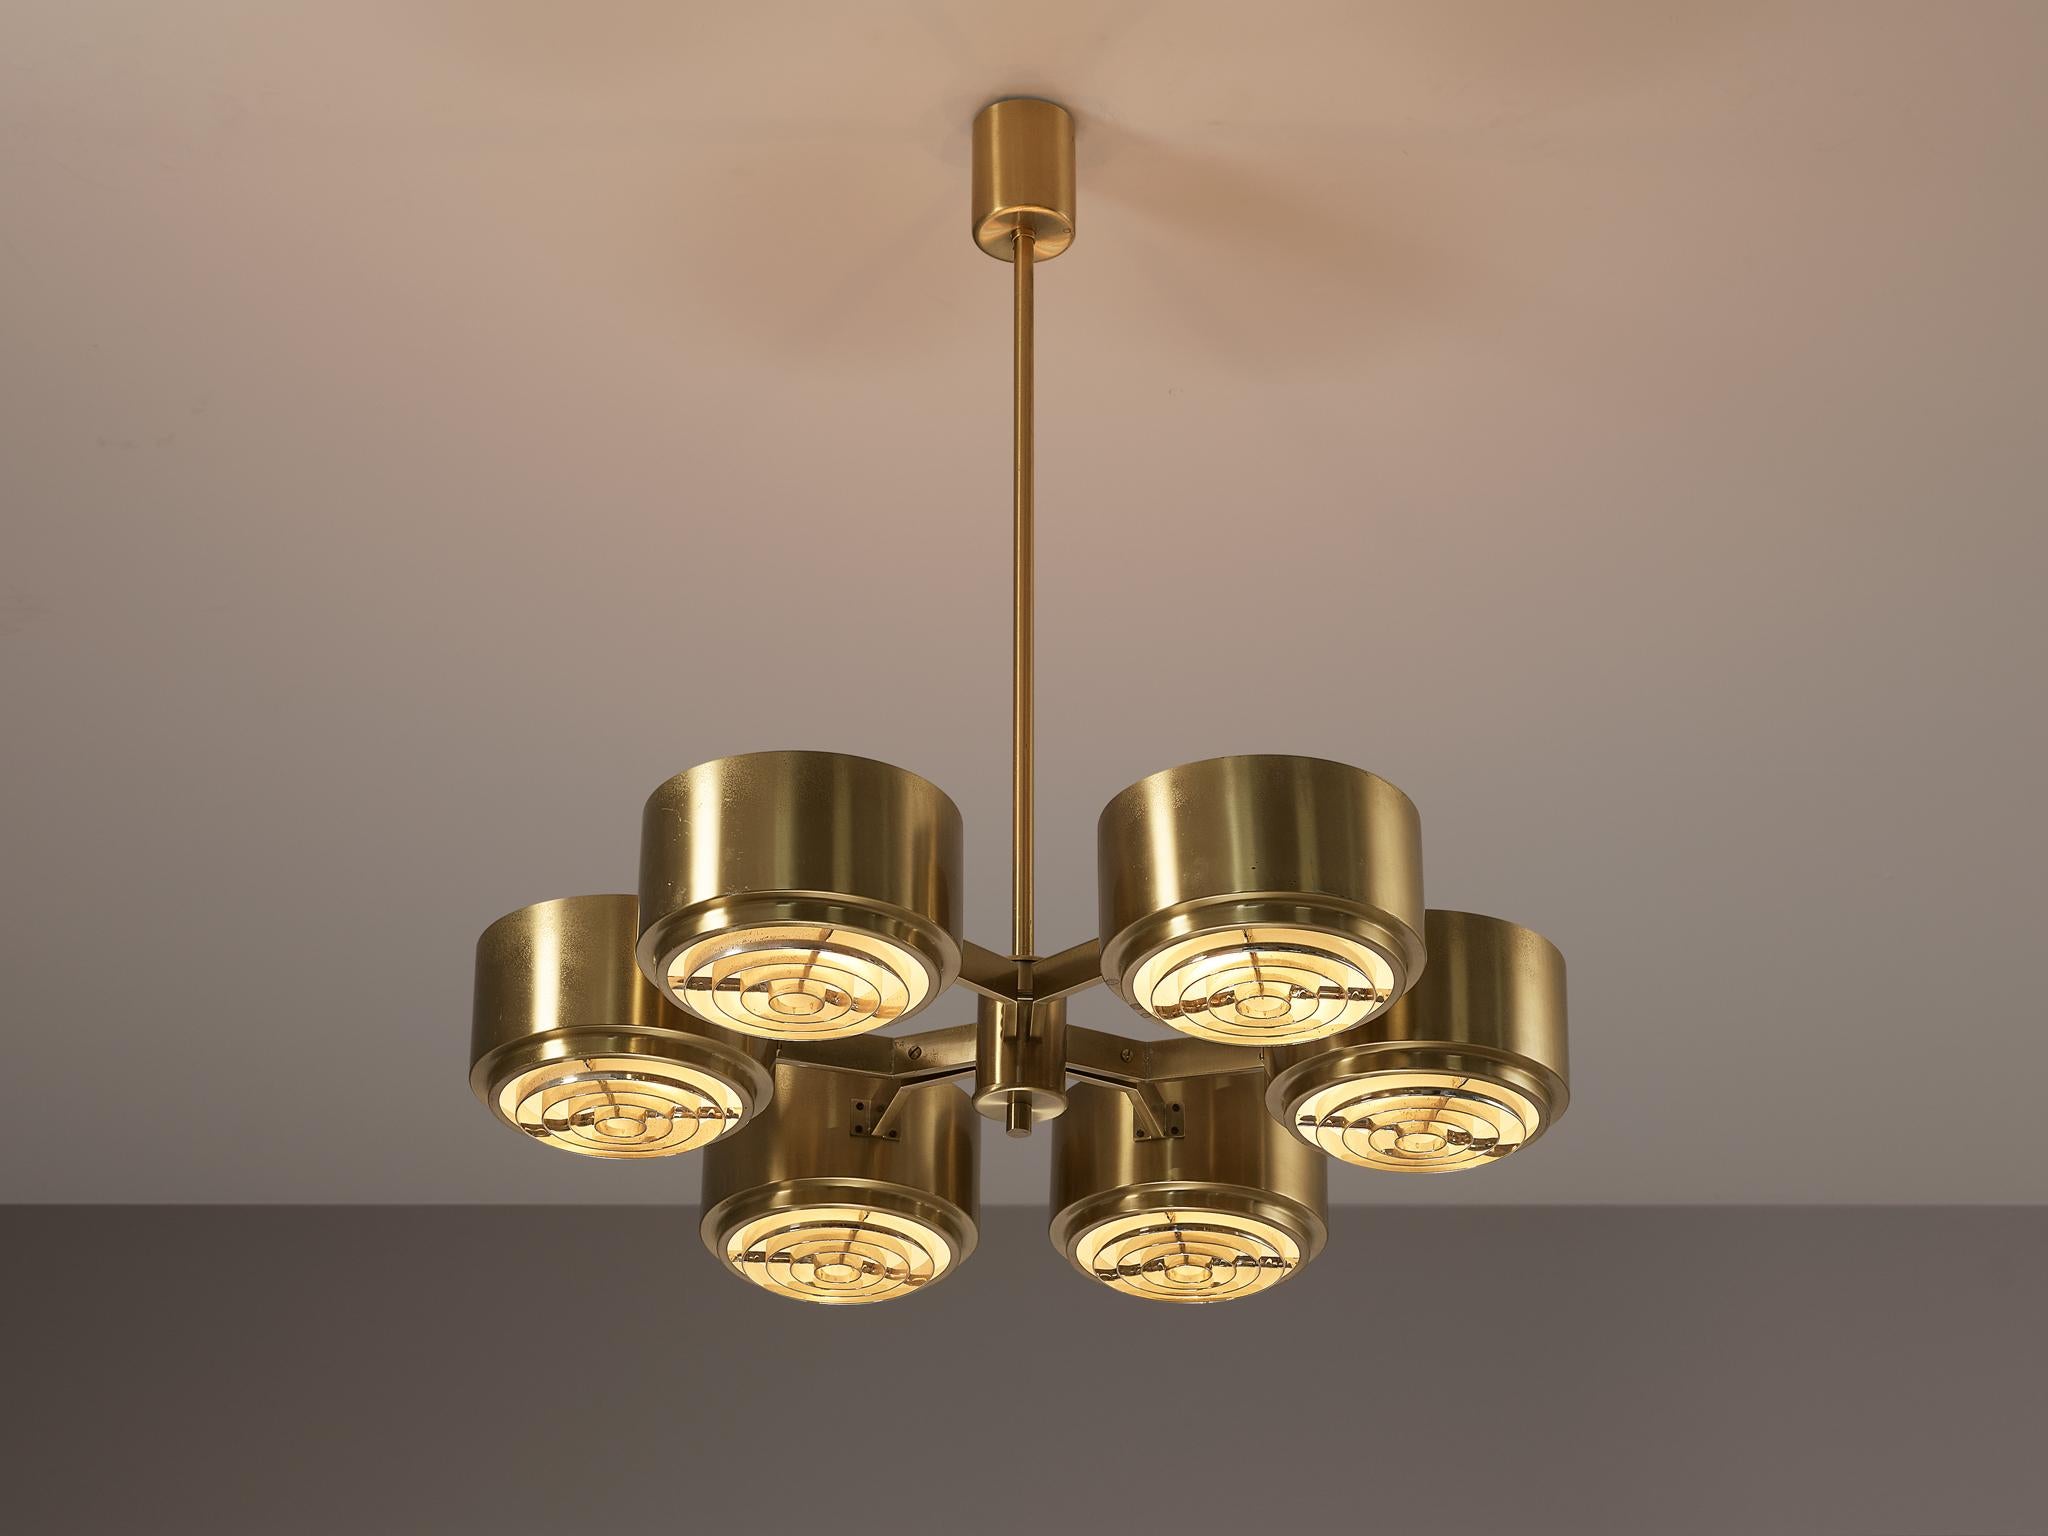 Hans-Agne Jakobsson for Hans-Agne Jakobsson AB in Markaryd, ceiling light, model T-493/6, brass, metal, Sweden, 1960s 

This stunning chandelier is designed by the Swedish designer Hans-Agne Jakobsson. It features six cylindrical shades which create